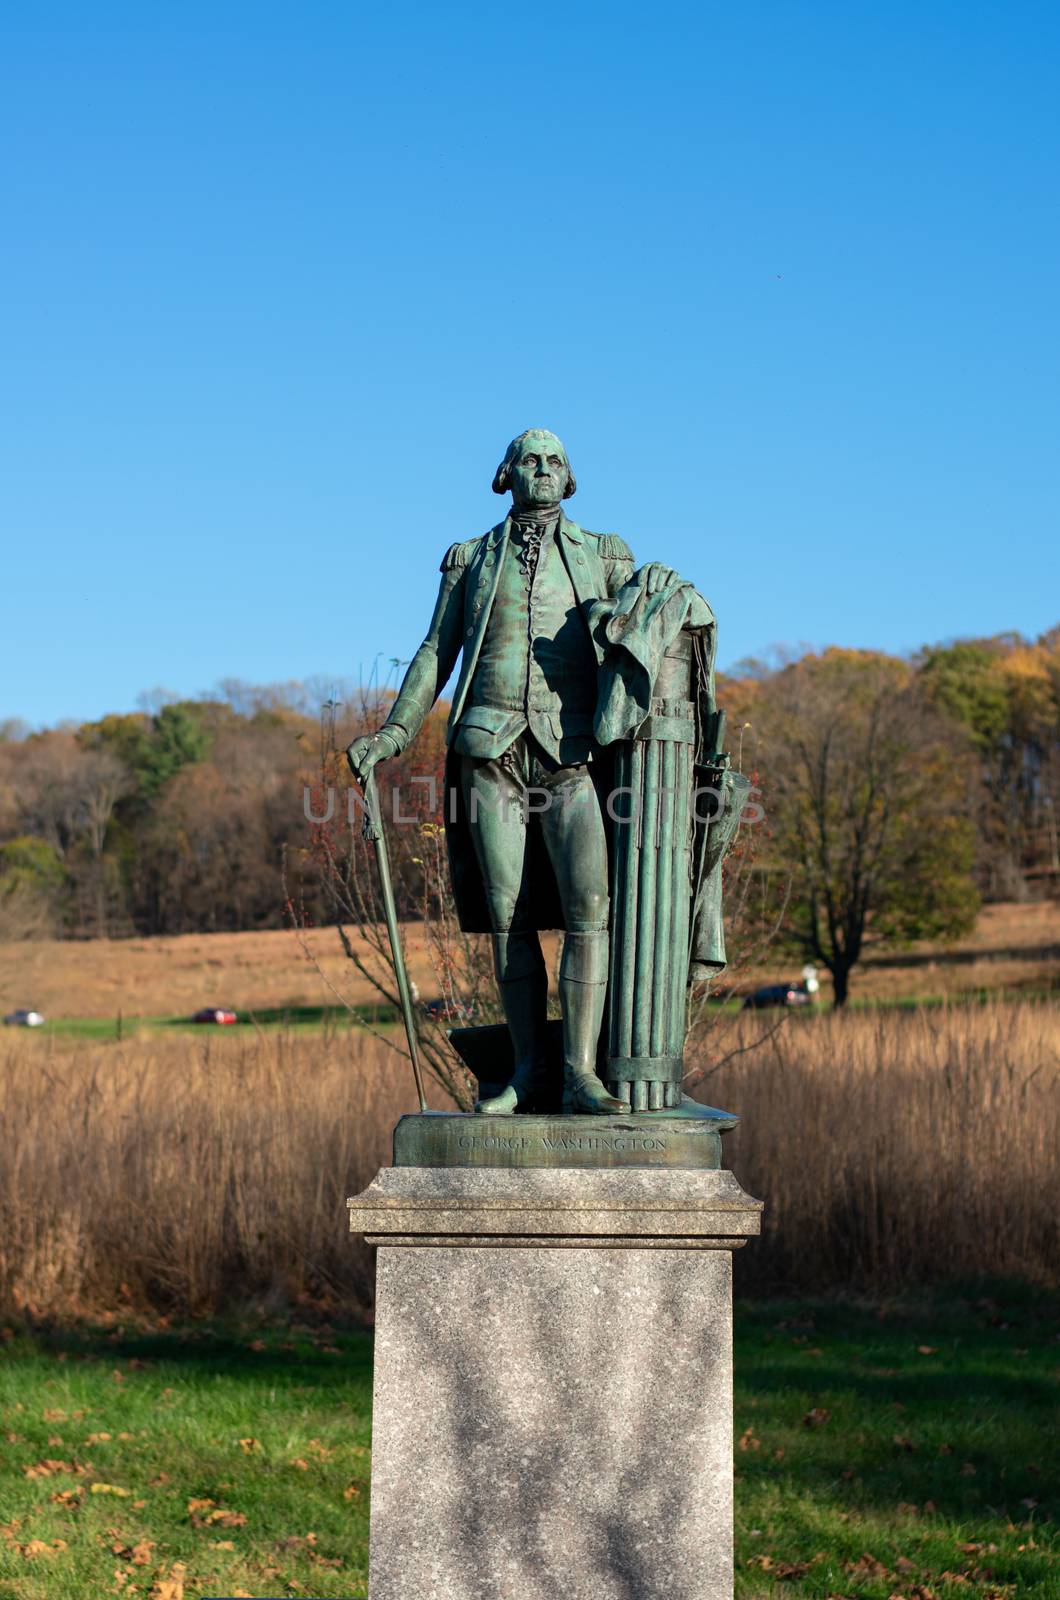 The General George Washington Statue at Valley Forge National Hi by bju12290